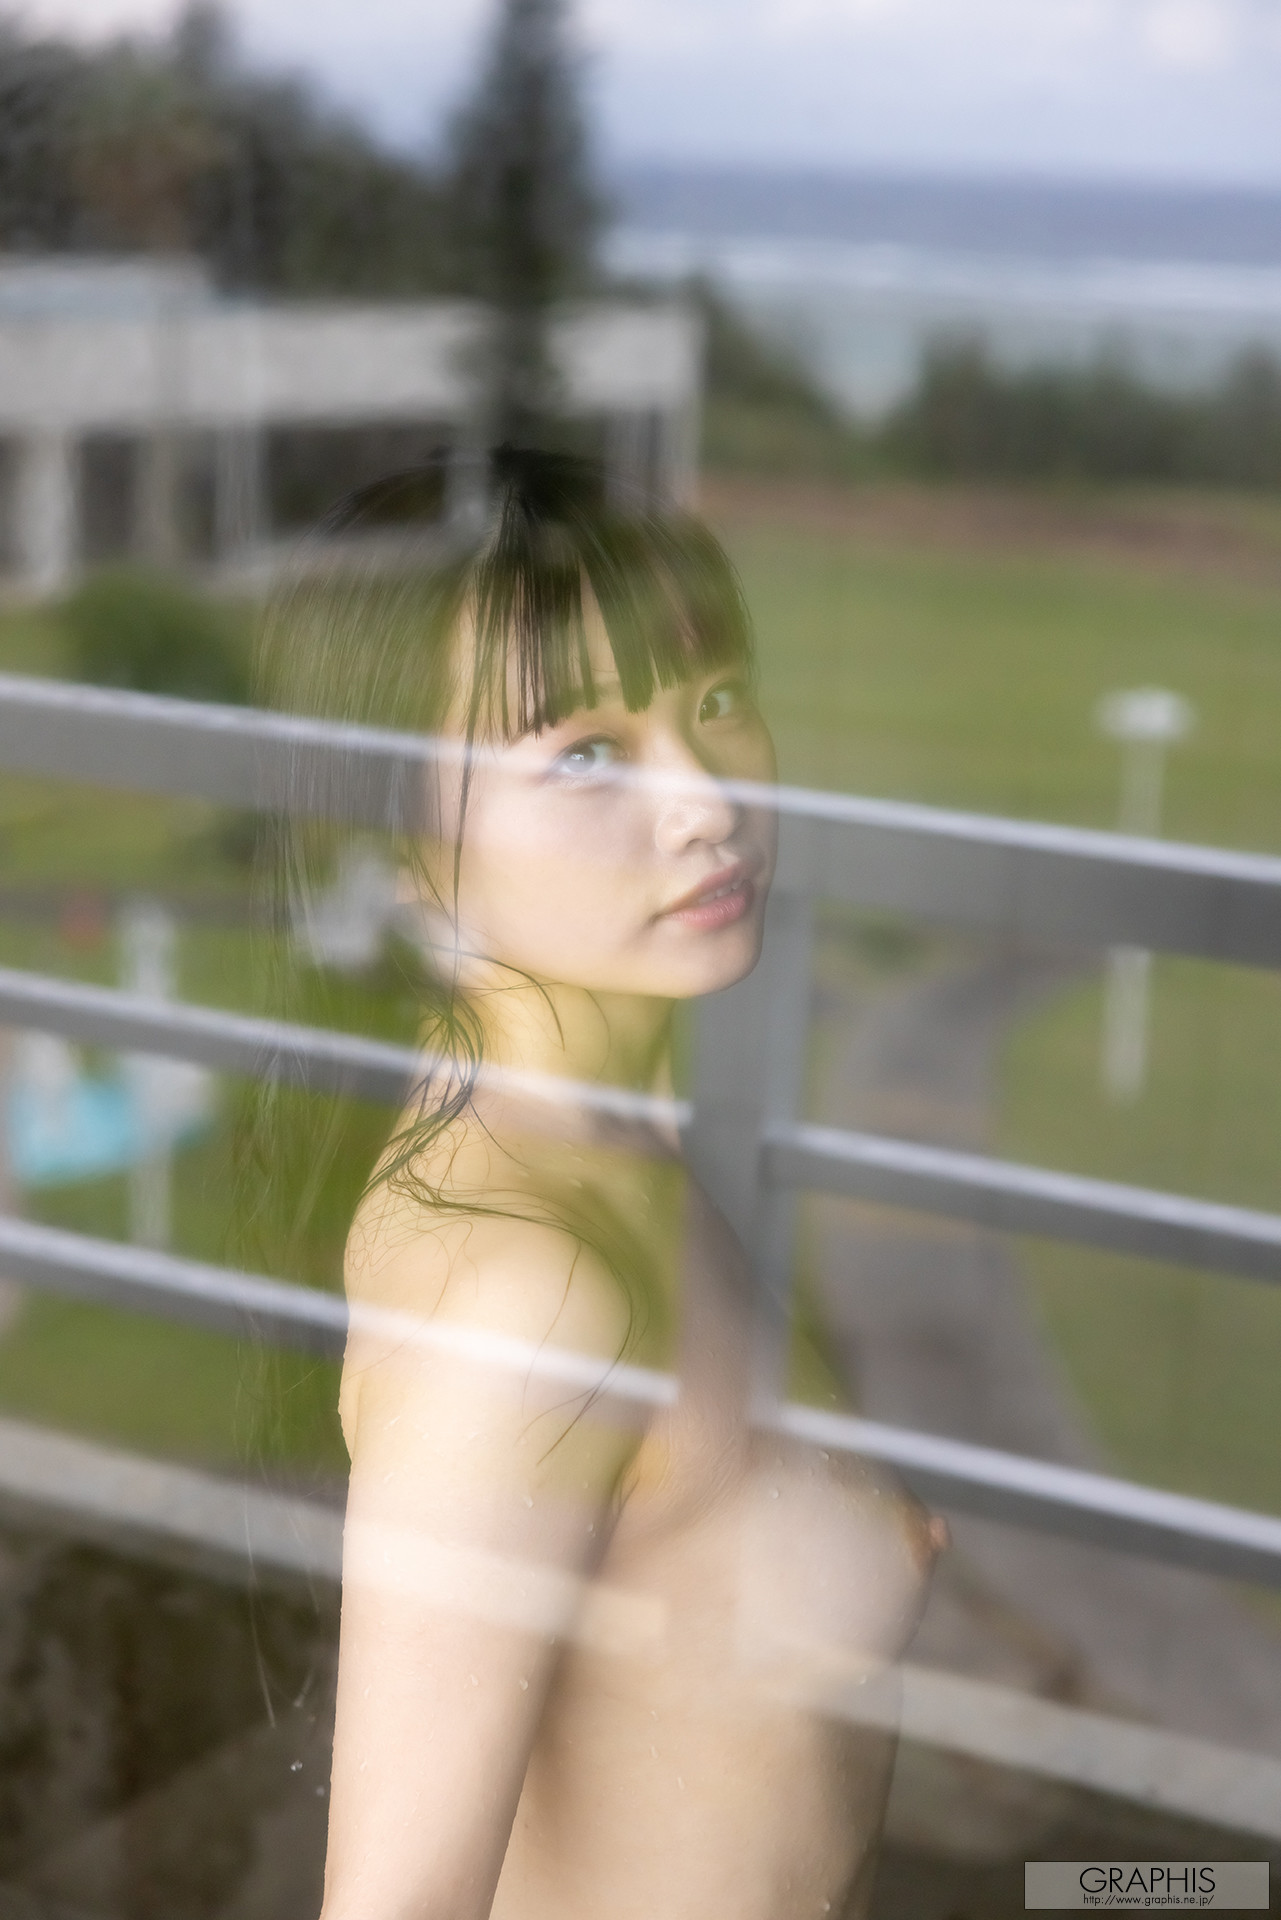 Urara Kanon 花音うらら, [Graphis] Gals 「To Be Loved」 Vol.04